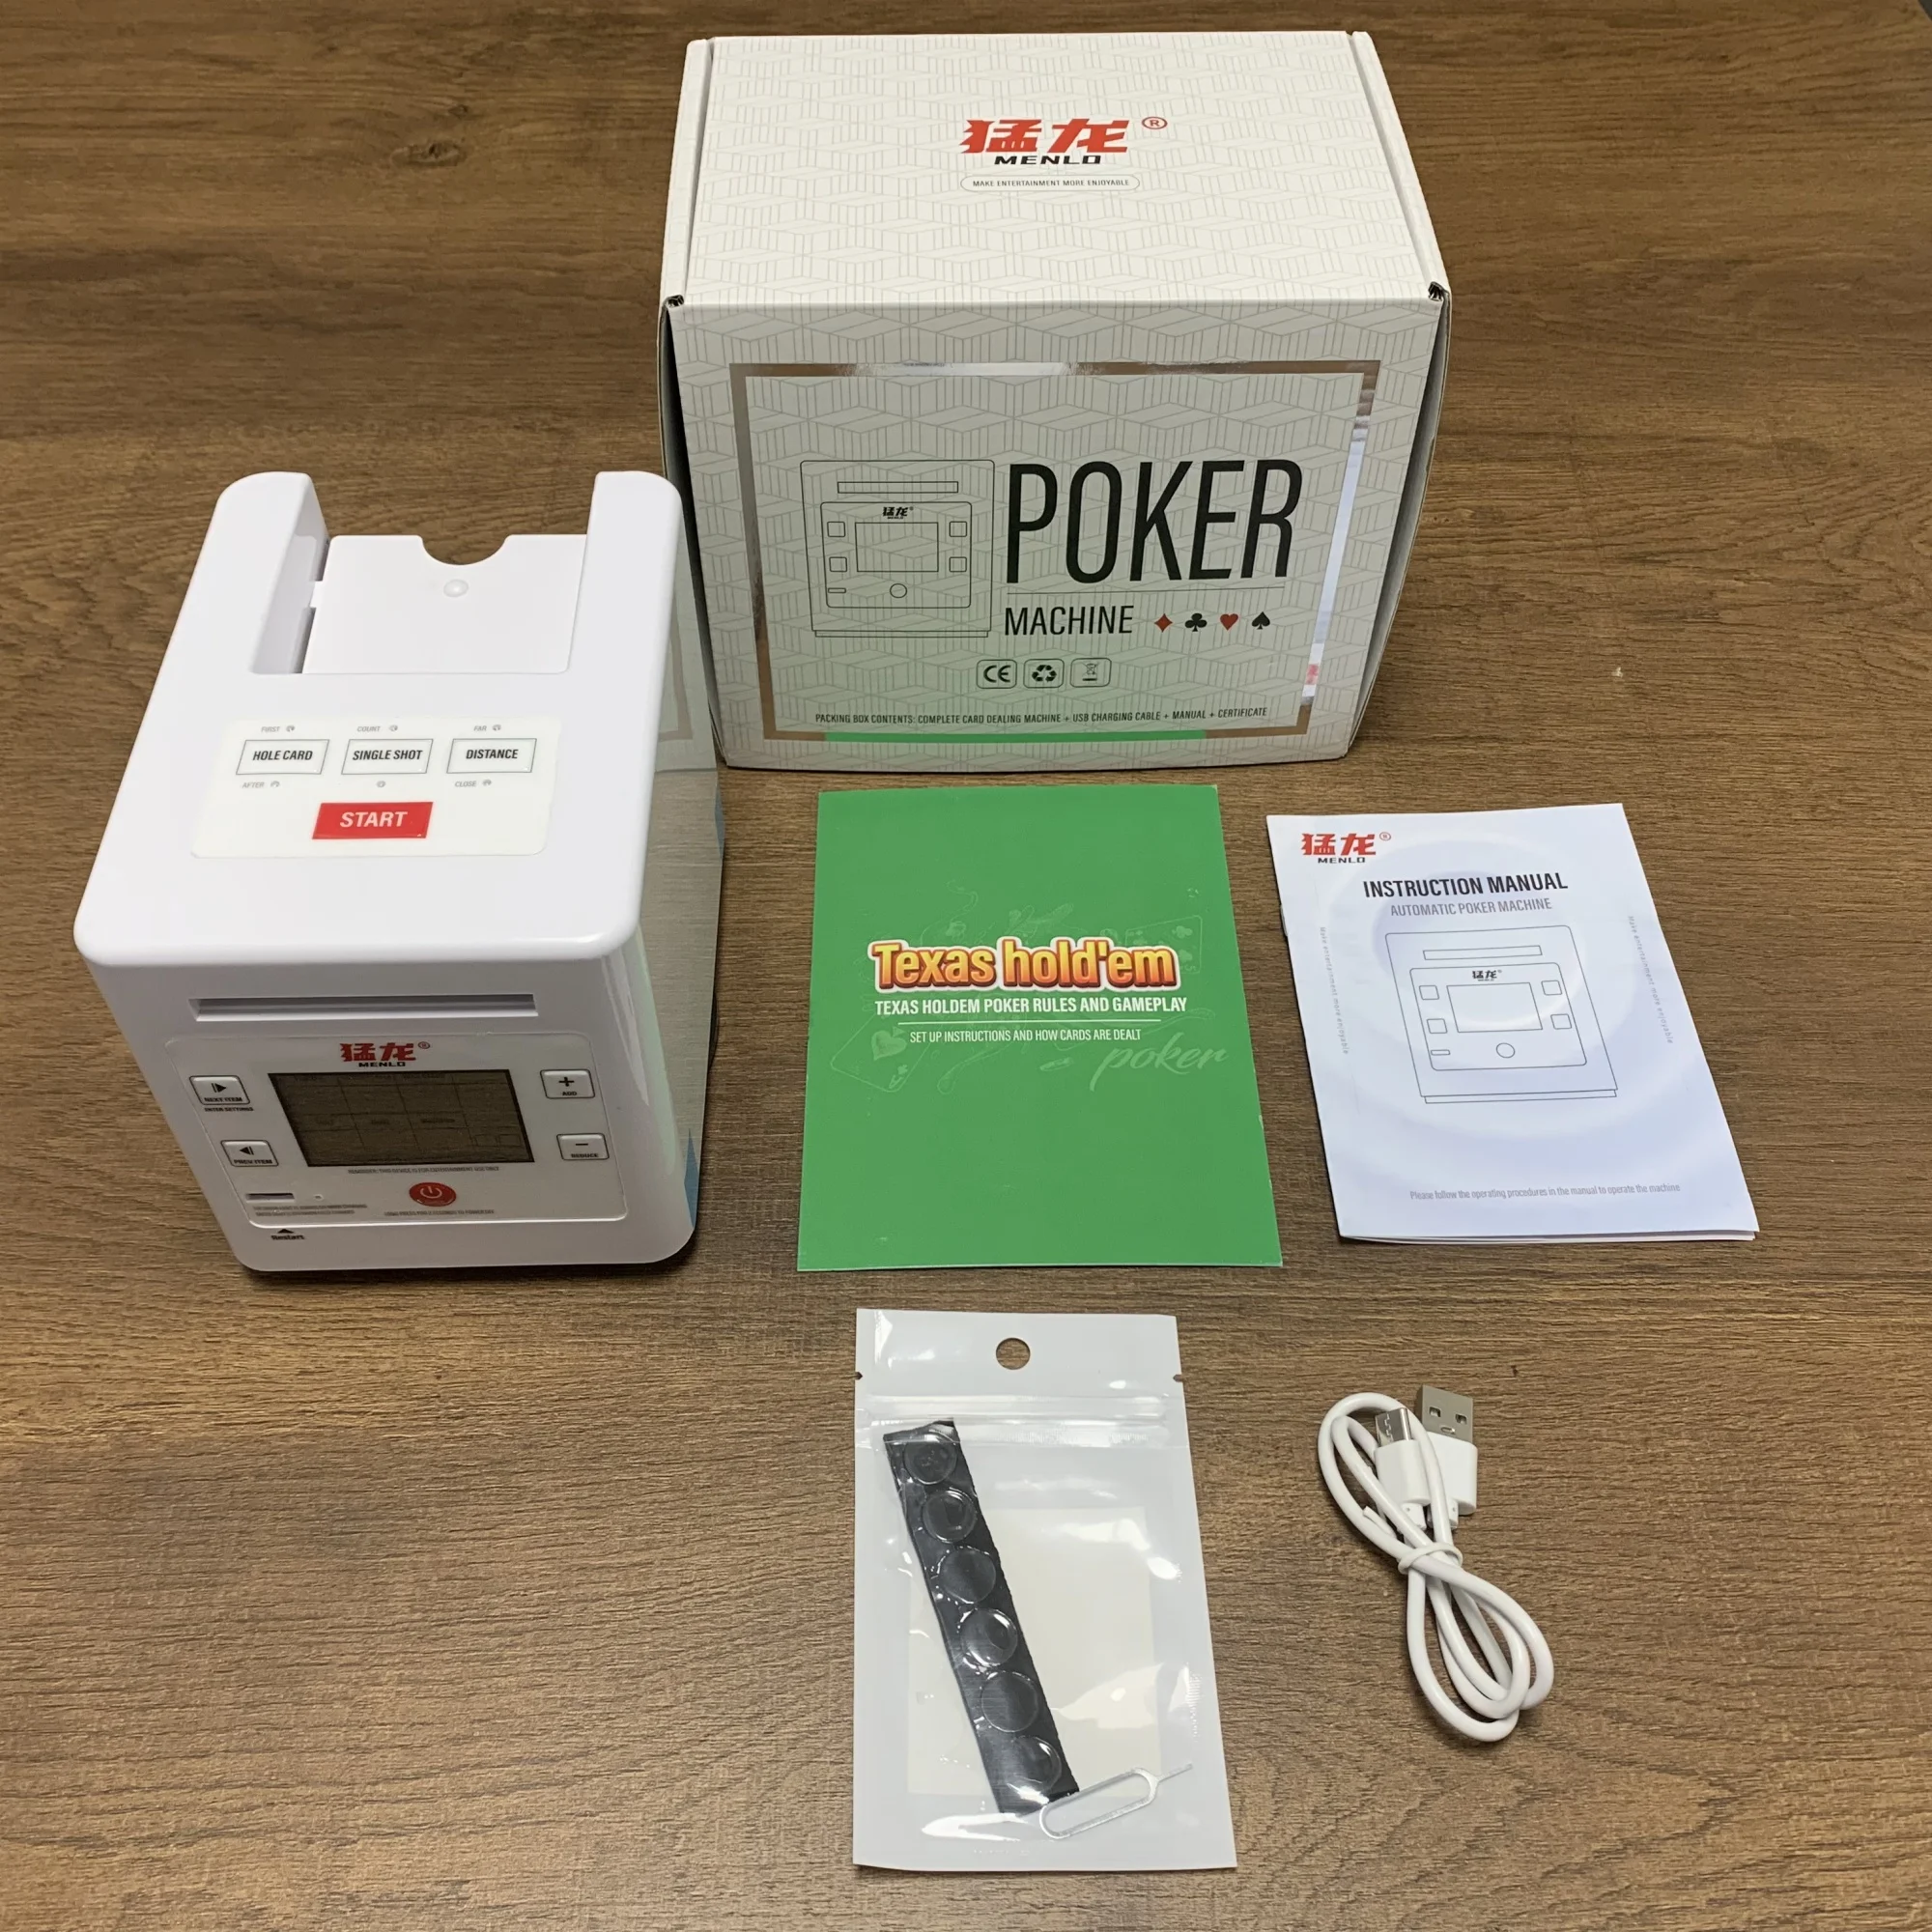 Underoof Automatic Card Dealer, Rechargeable Poker Dealing Machine, Wireless Poker Card Distributor Dispenser for Texas Hold' em